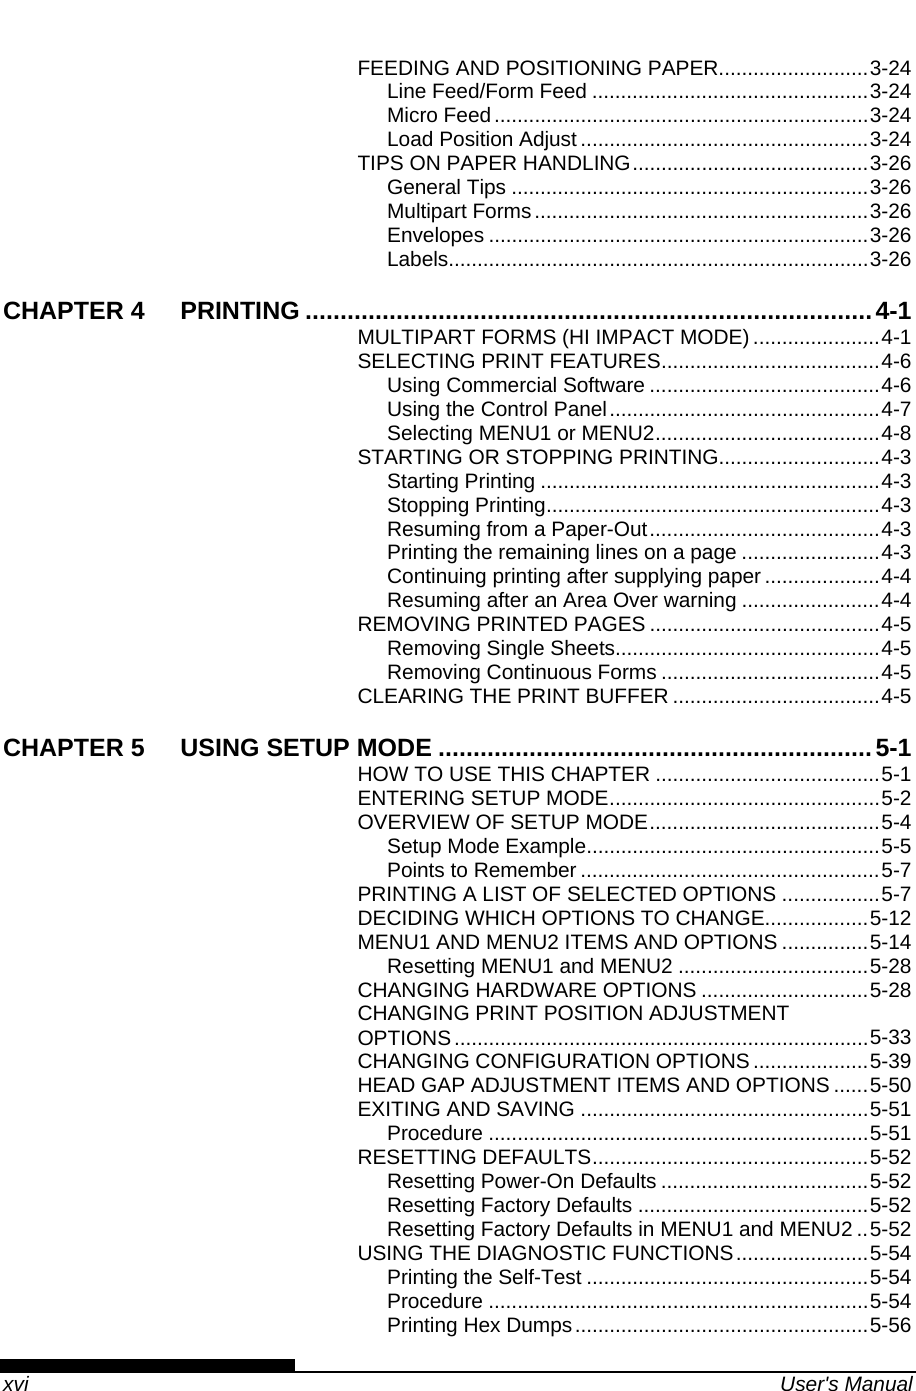    xvi  User&apos;s Manual FEEDING AND POSITIONING PAPER..........................3-24 Line Feed/Form Feed ................................................3-24 Micro Feed.................................................................3-24 Load Position Adjust ..................................................3-24 TIPS ON PAPER HANDLING.........................................3-26 General Tips ..............................................................3-26 Multipart Forms..........................................................3-26 Envelopes ..................................................................3-26 Labels.........................................................................3-26 CHAPTER 4 PRINTING .................................................................................4-1 MULTIPART FORMS (HI IMPACT MODE) ......................4-1 SELECTING PRINT FEATURES......................................4-6 Using Commercial Software ........................................4-6 Using the Control Panel...............................................4-7 Selecting MENU1 or MENU2.......................................4-8 STARTING OR STOPPING PRINTING............................4-3 Starting Printing ...........................................................4-3 Stopping Printing..........................................................4-3 Resuming from a Paper-Out........................................4-3 Printing the remaining lines on a page ........................4-3 Continuing printing after supplying paper ....................4-4 Resuming after an Area Over warning ........................4-4 REMOVING PRINTED PAGES ........................................4-5 Removing Single Sheets..............................................4-5 Removing Continuous Forms ......................................4-5 CLEARING THE PRINT BUFFER ....................................4-5 CHAPTER 5 USING SETUP MODE ..............................................................5-1 HOW TO USE THIS CHAPTER .......................................5-1 ENTERING SETUP MODE...............................................5-2 OVERVIEW OF SETUP MODE........................................5-4 Setup Mode Example...................................................5-5 Points to Remember ....................................................5-7 PRINTING A LIST OF SELECTED OPTIONS .................5-7 DECIDING WHICH OPTIONS TO CHANGE..................5-12 MENU1 AND MENU2 ITEMS AND OPTIONS ...............5-14 Resetting MENU1 and MENU2 .................................5-28 CHANGING HARDWARE OPTIONS .............................5-28 CHANGING PRINT POSITION ADJUSTMENT OPTIONS........................................................................5-33 CHANGING CONFIGURATION OPTIONS....................5-39 HEAD GAP ADJUSTMENT ITEMS AND OPTIONS ......5-50 EXITING AND SAVING ..................................................5-51 Procedure ..................................................................5-51 RESETTING DEFAULTS................................................5-52 Resetting Power-On Defaults ....................................5-52 Resetting Factory Defaults ........................................5-52 Resetting Factory Defaults in MENU1 and MENU2 ..5-52 USING THE DIAGNOSTIC FUNCTIONS.......................5-54 Printing the Self-Test .................................................5-54 Procedure ..................................................................5-54 Printing Hex Dumps...................................................5-56 